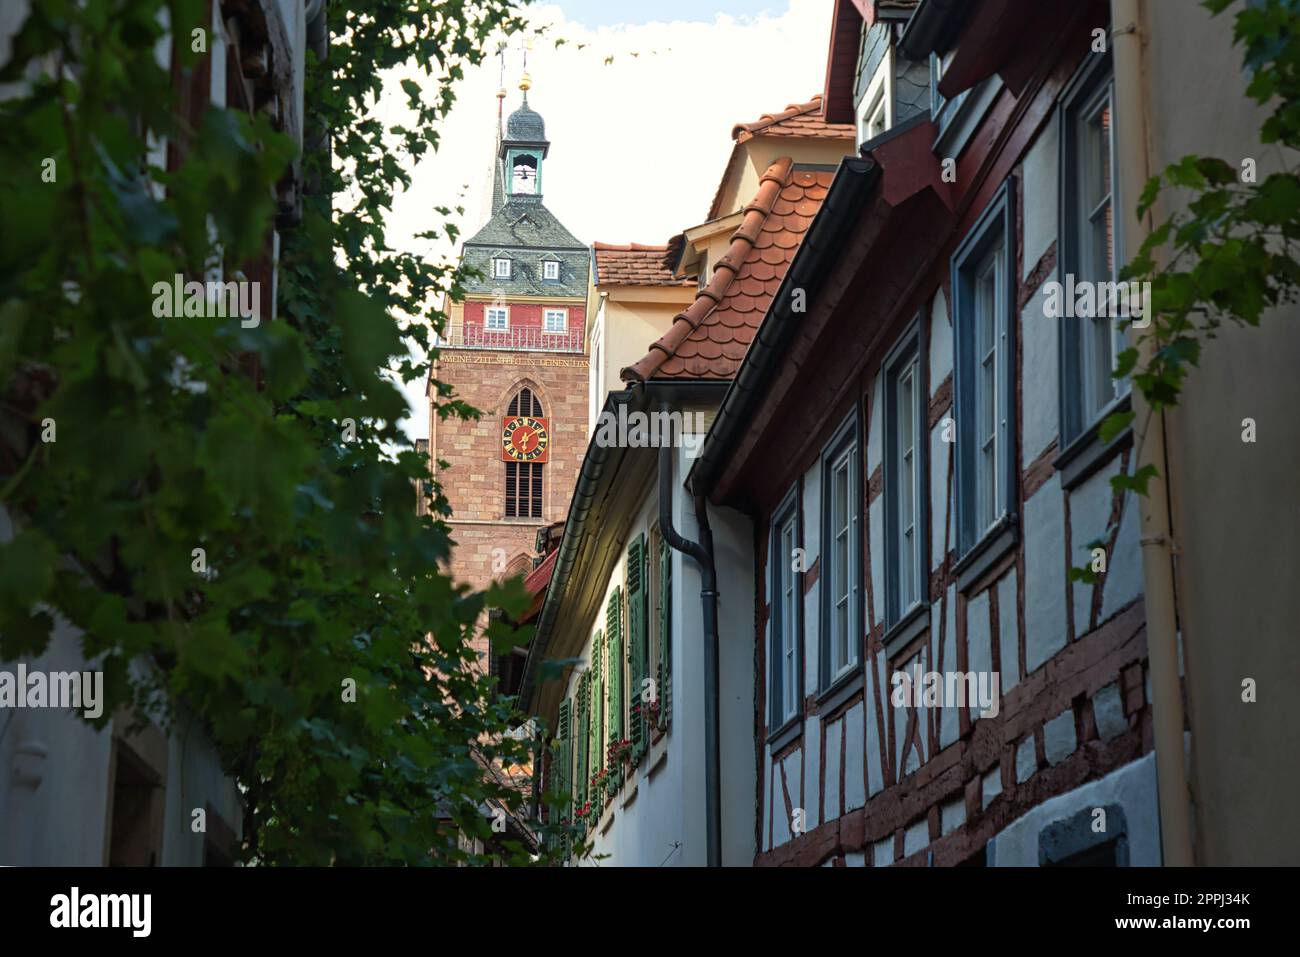 Neustadt an der Weinstrasse, Rhineland-Palatinate, Germany - 01 July 2022: The tower of the Stiftskirche St. Ã„gidius over half-timbered houses of the old town. Stock Photo